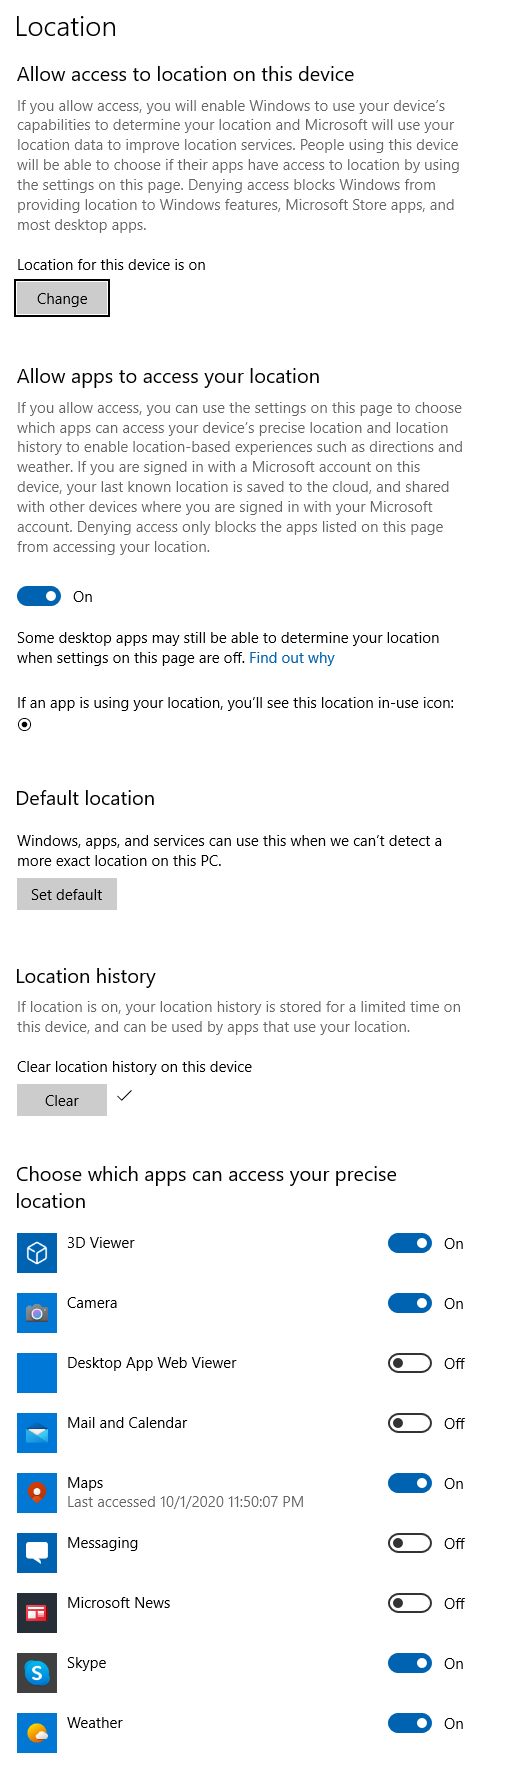 Windows 10 Geolocation not working f22c27e2-2190-45ba-90a2-0dd4cac53a86?upload=true.png